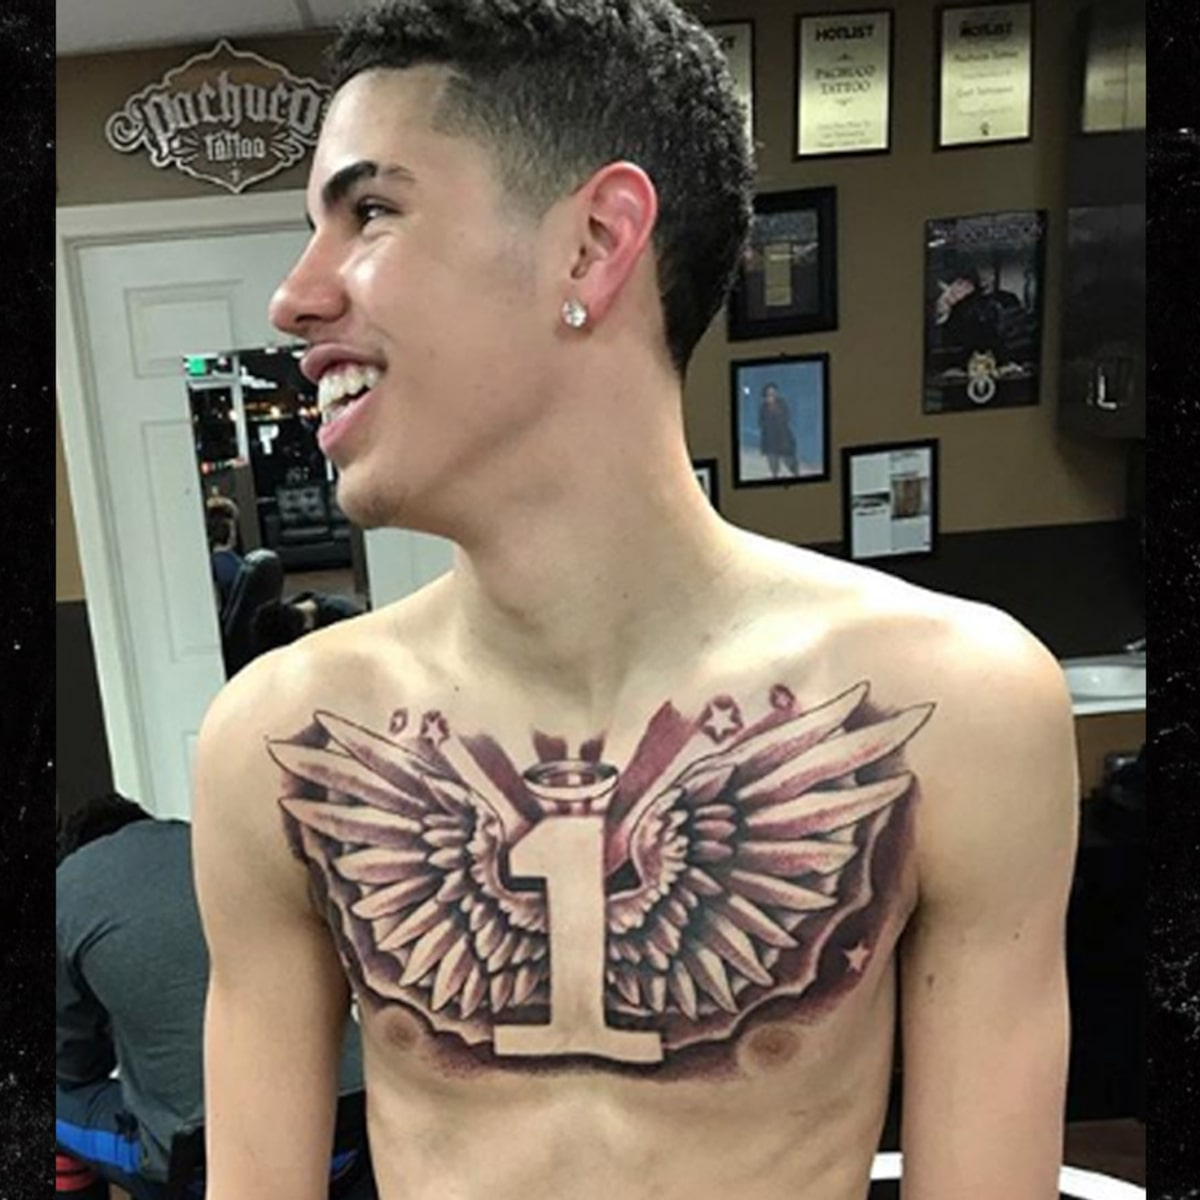 Lamelo Ball Gets Massive Chest Tattoo with regard to dimensions 1200 X 1200...